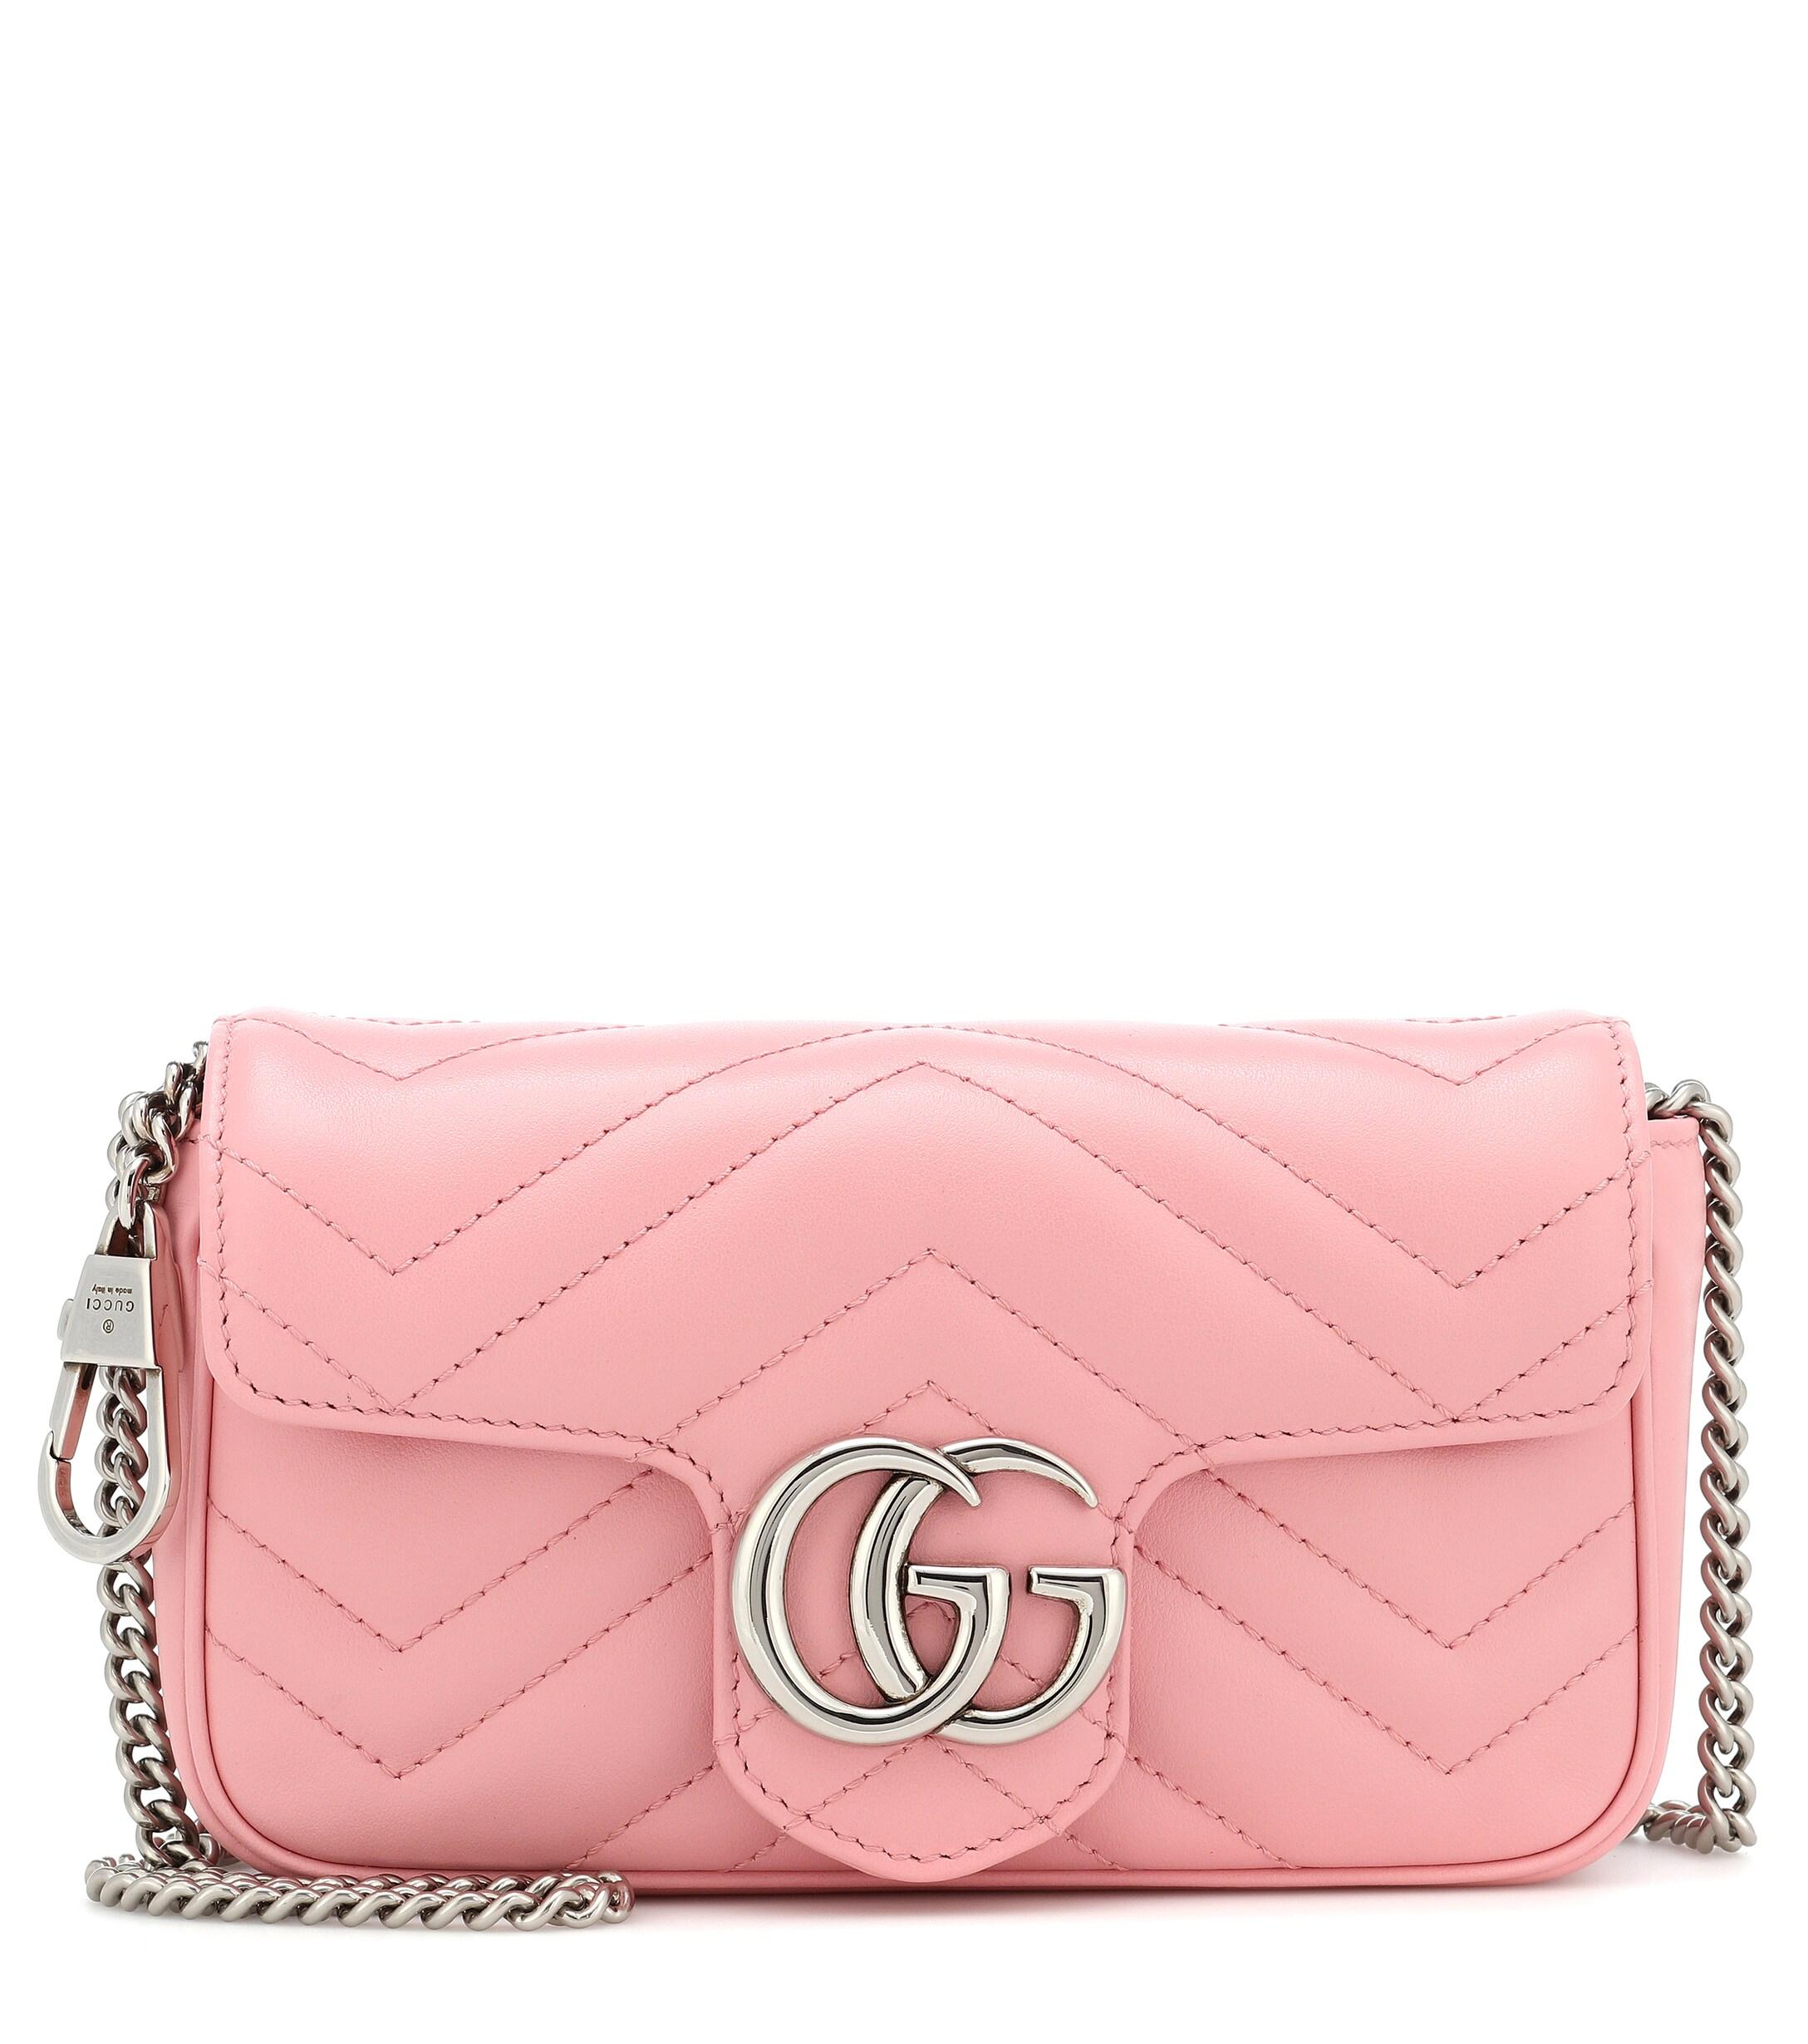 Gucci GG Marmont Super Mini Leather Shoulder Bag in Pink | Lyst